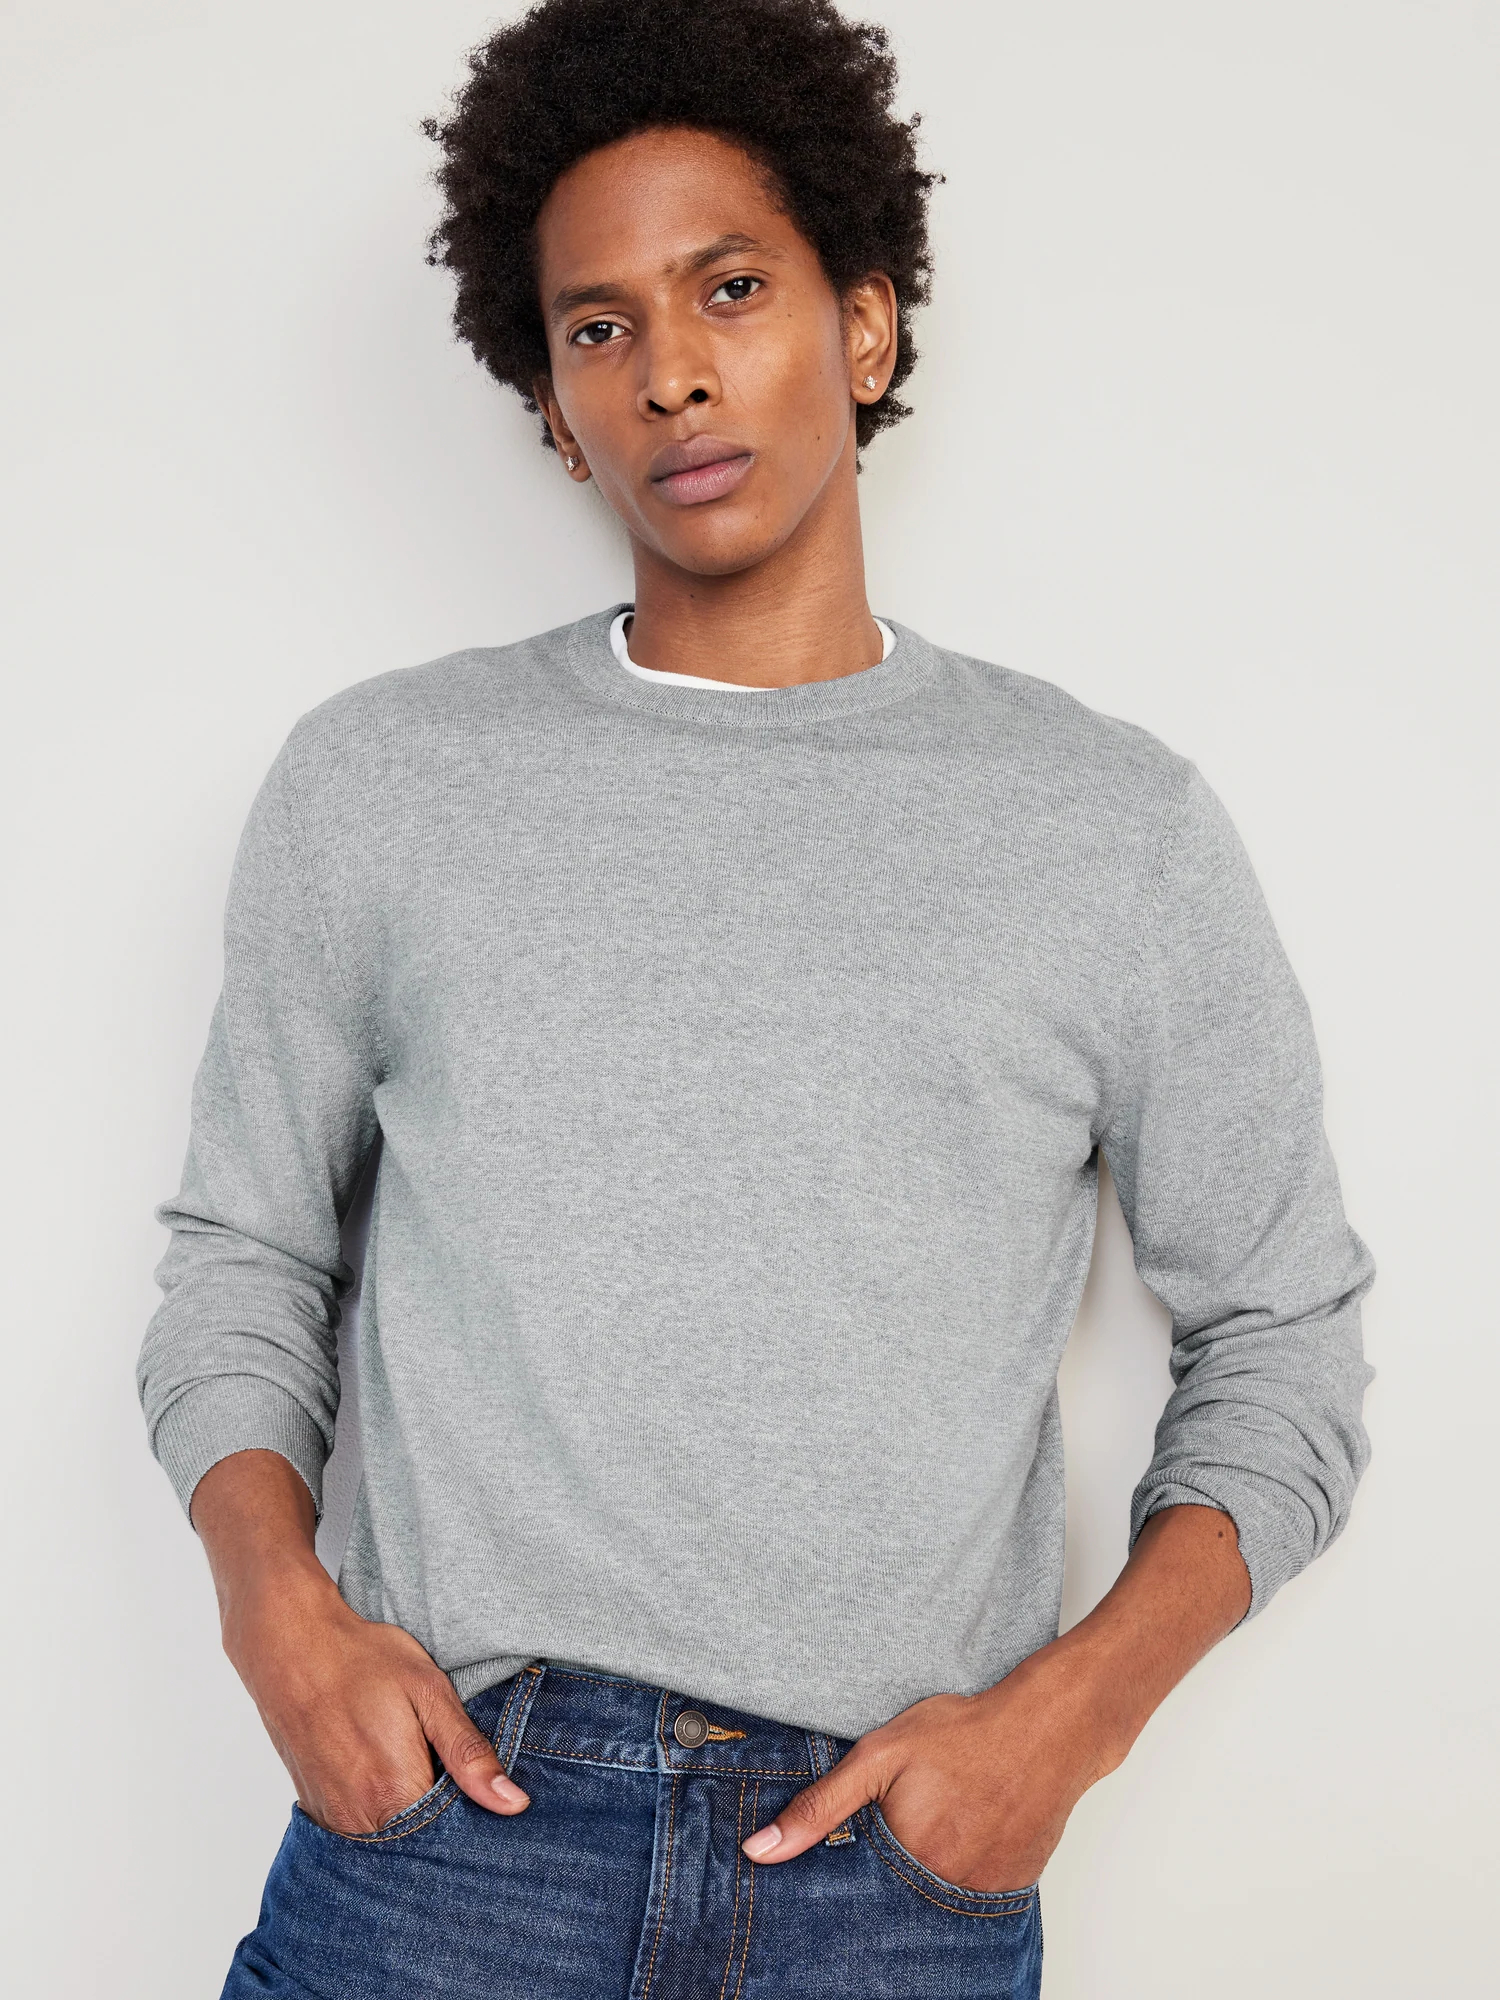 Lightweight sweaters in the realm of men's fashion, hold a unique position as transitional wardrobe staples that blend comfort with style.